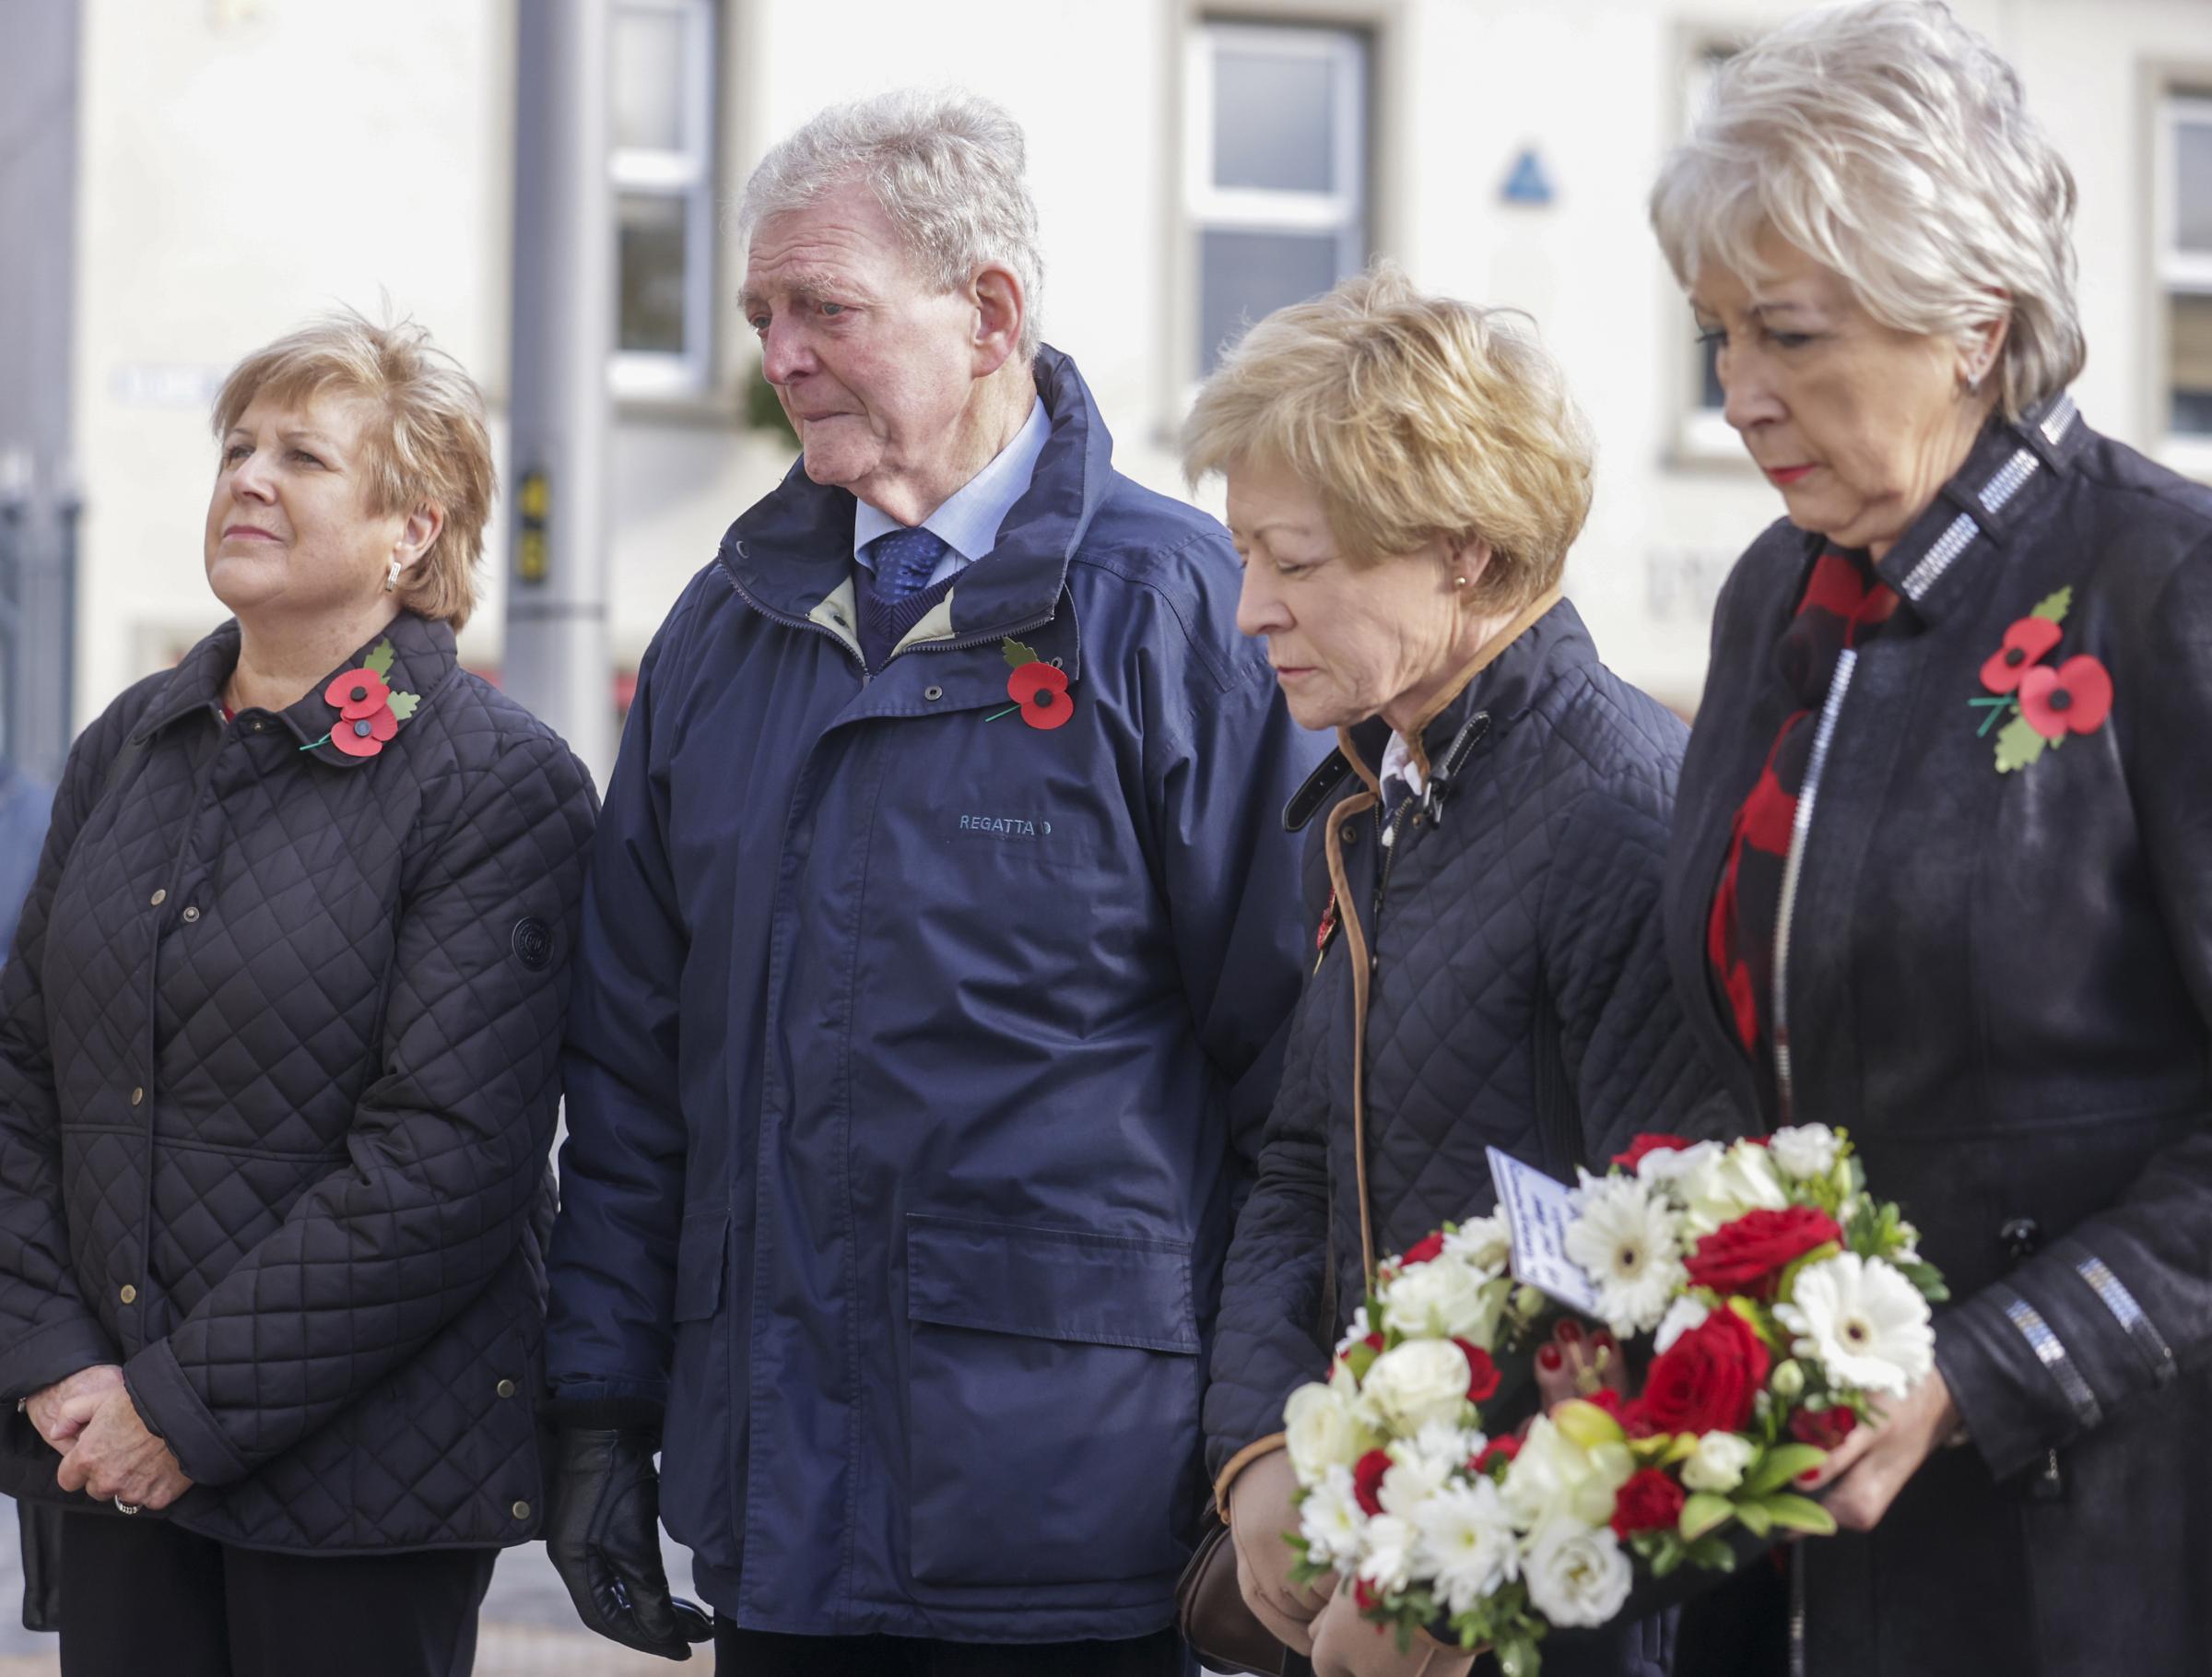 Joan Anderson, (daughter), Sam Blair, (son-in-law), Ruth Blair, (daughter), and Margaret Veitch, (daughter of William and Agnes Mullan, who were killed in The Enniskillen Bomb.